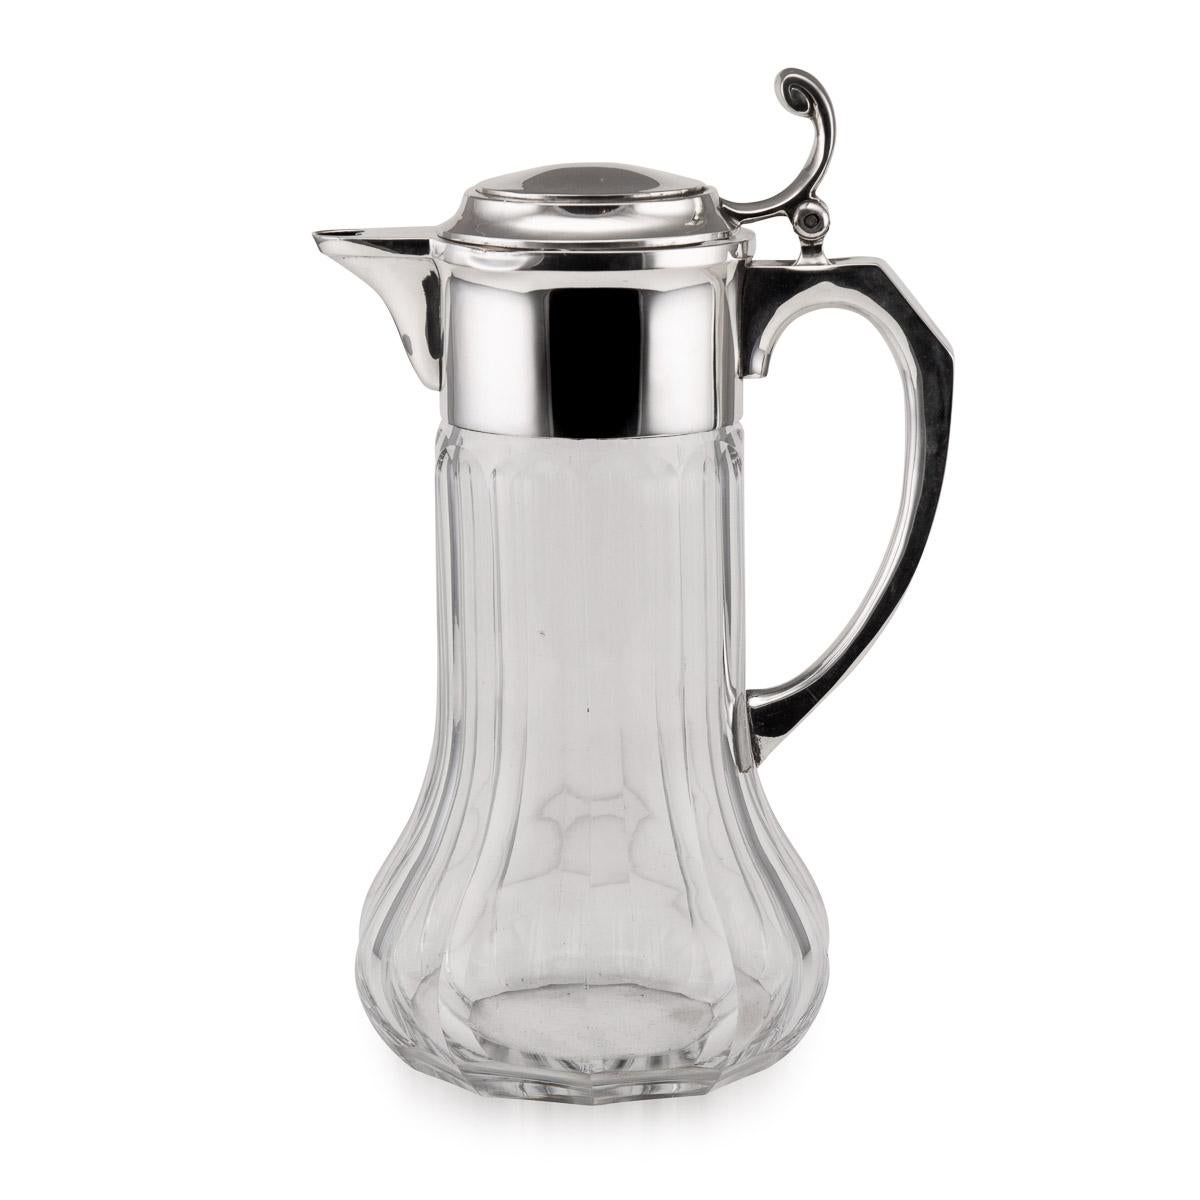 Antique early-20th century German Art Deco solid silver and glass massive lemonade jug with grooved glass body.

Condition
In great condition - no damage.

Size
Diameter: 17cm
Height: 37cm.